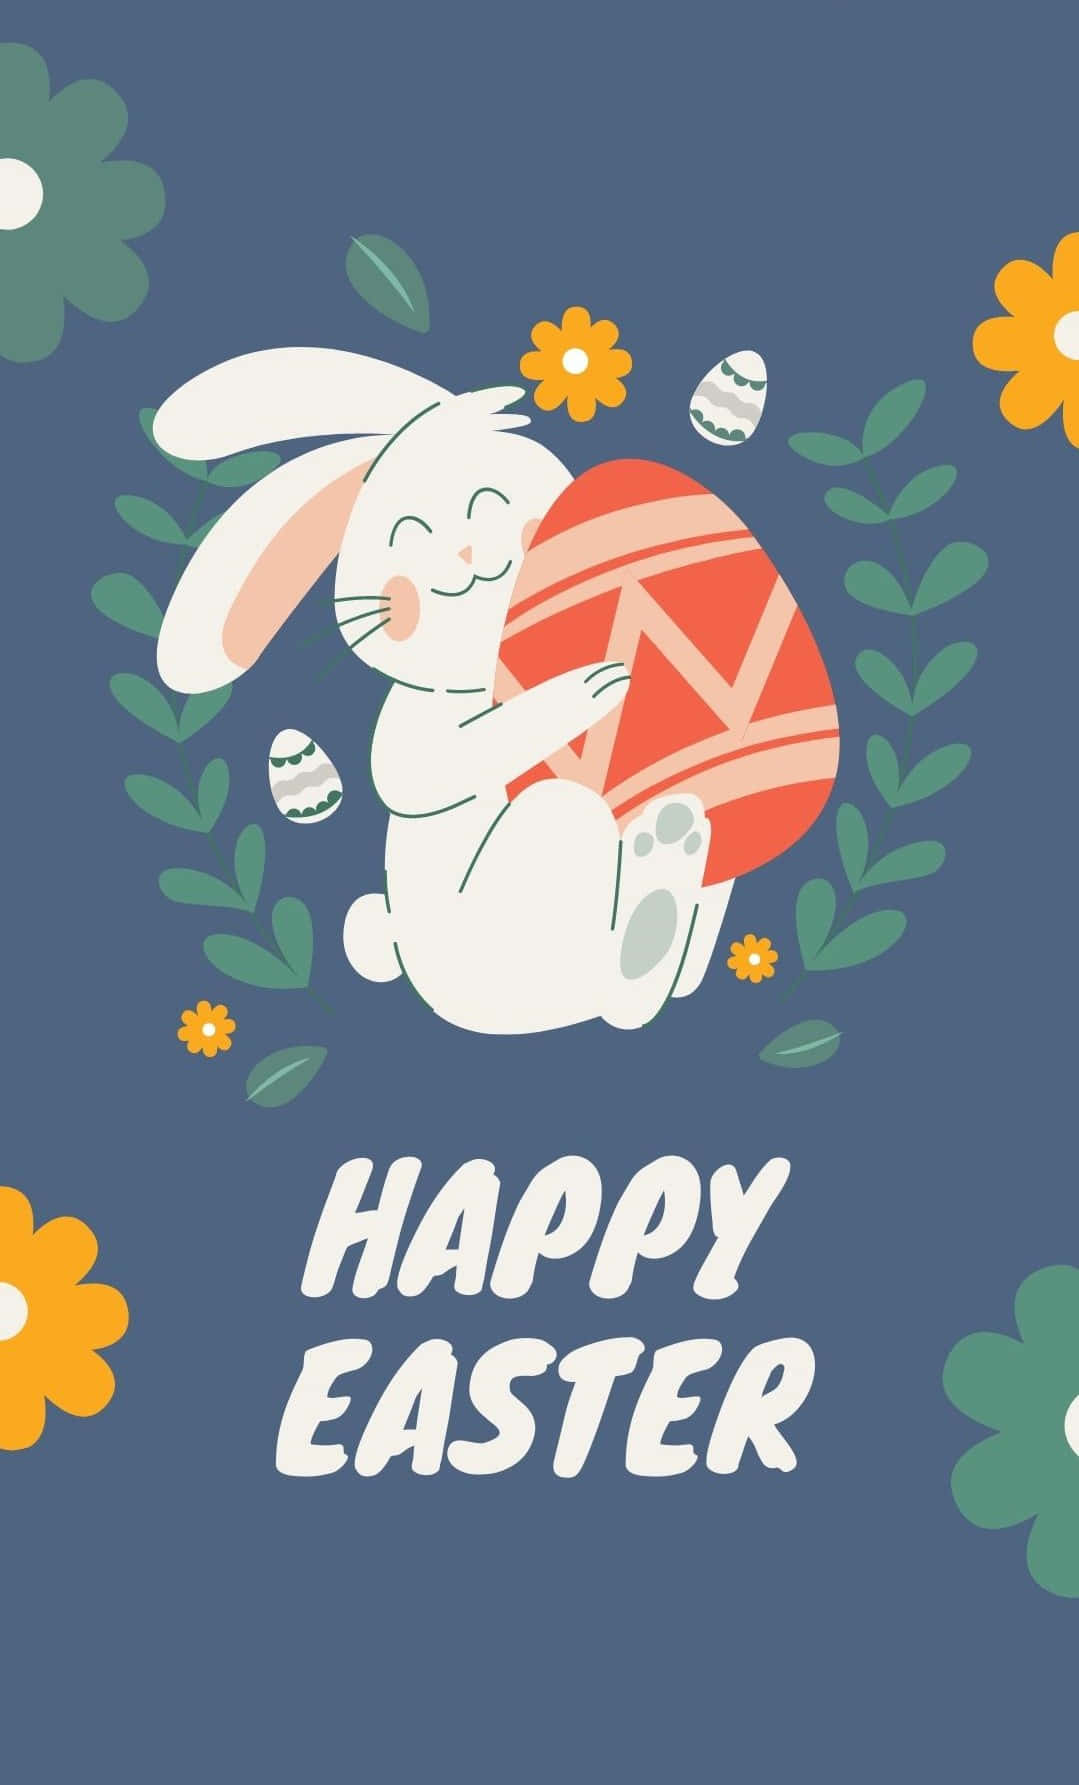 Celebrate Easter with this adorable Cute Easter Iphone Wallpaper